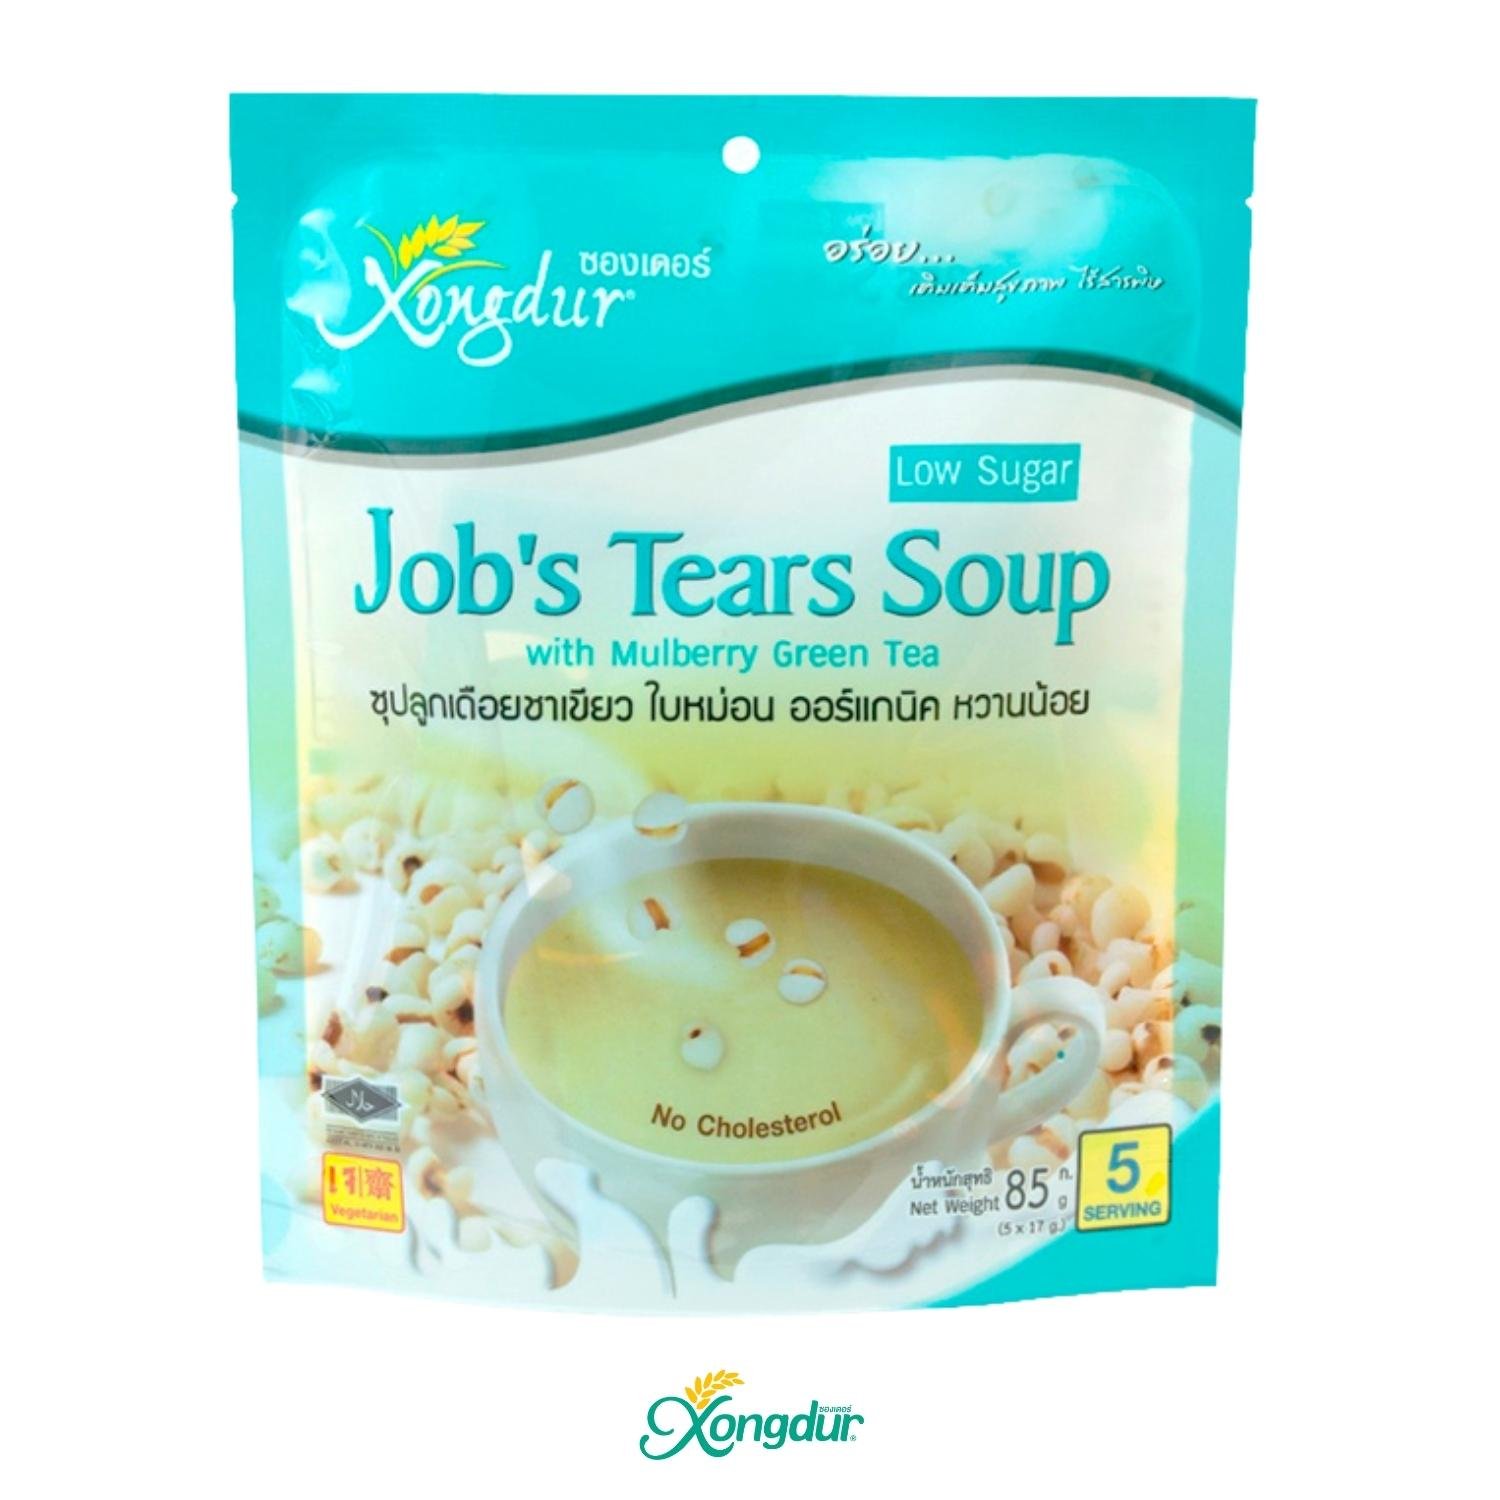 Job's Tears Soup With Mulberry Green Tea Low Sugar